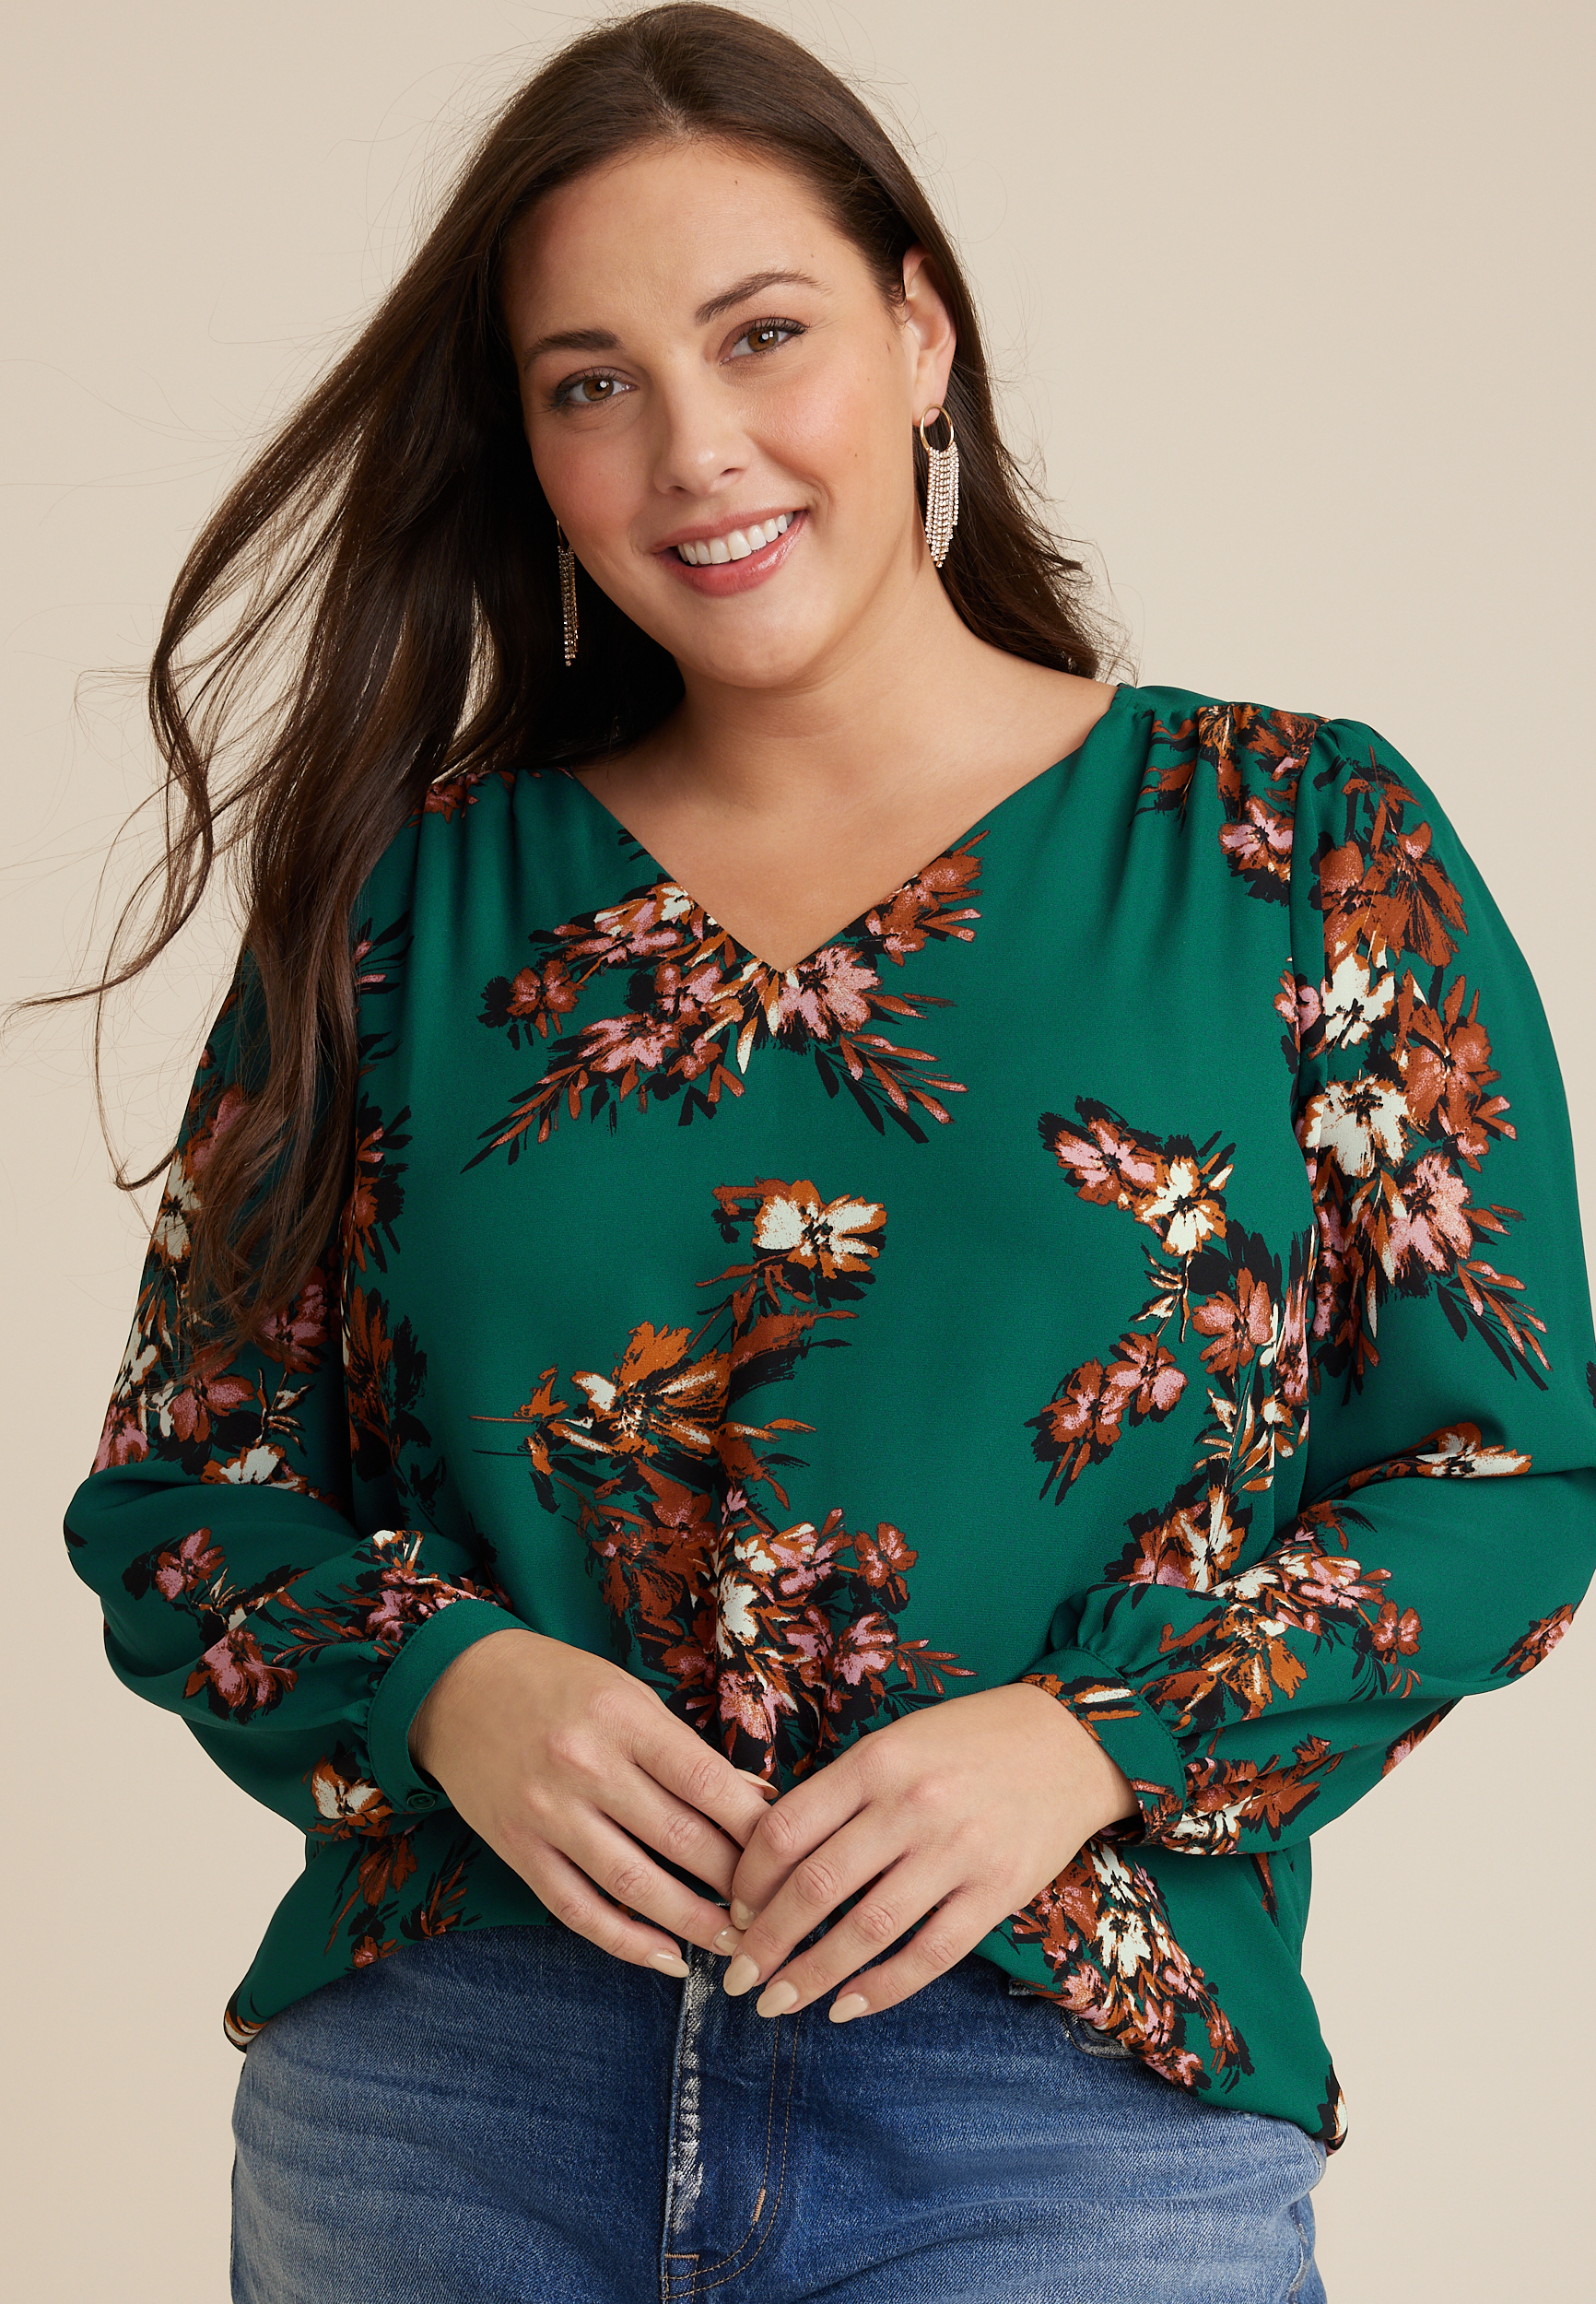 Girdtyd Womens Plus Size Tops Button Up Tunic Tops Floral Pleated